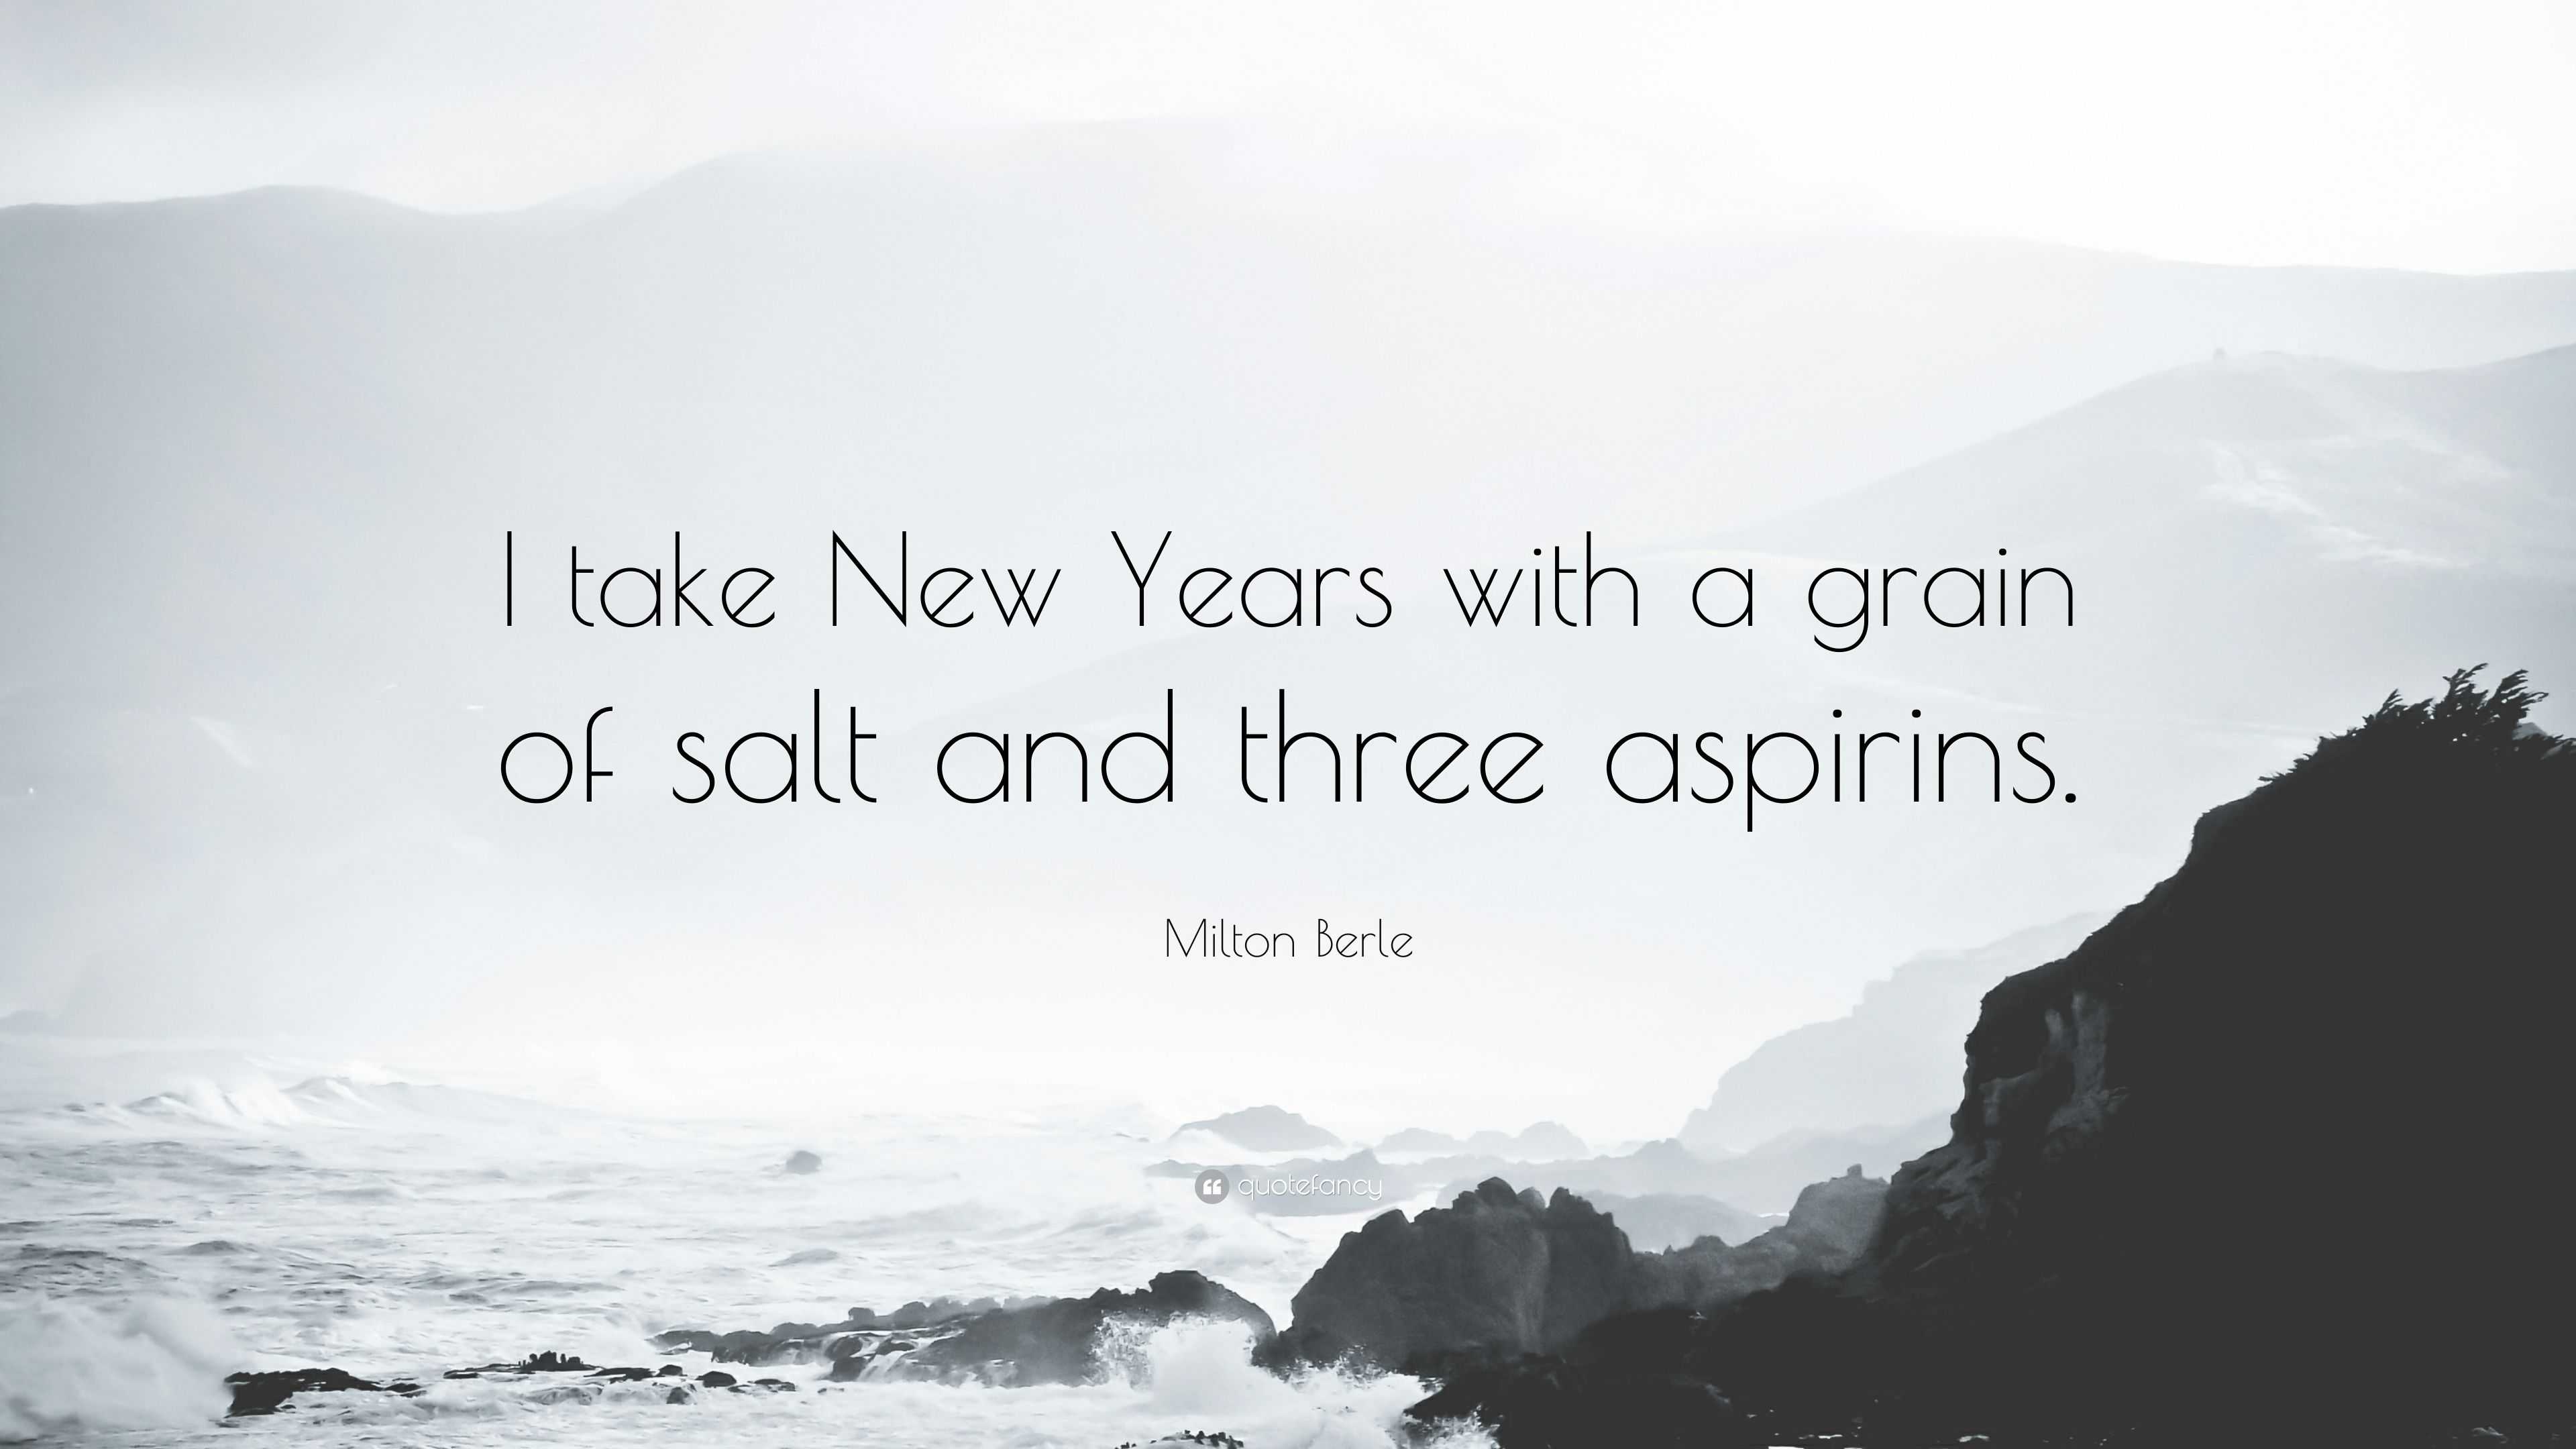 Milton Berle Quote: “I take New Years with a grain of salt and three  aspirins.”